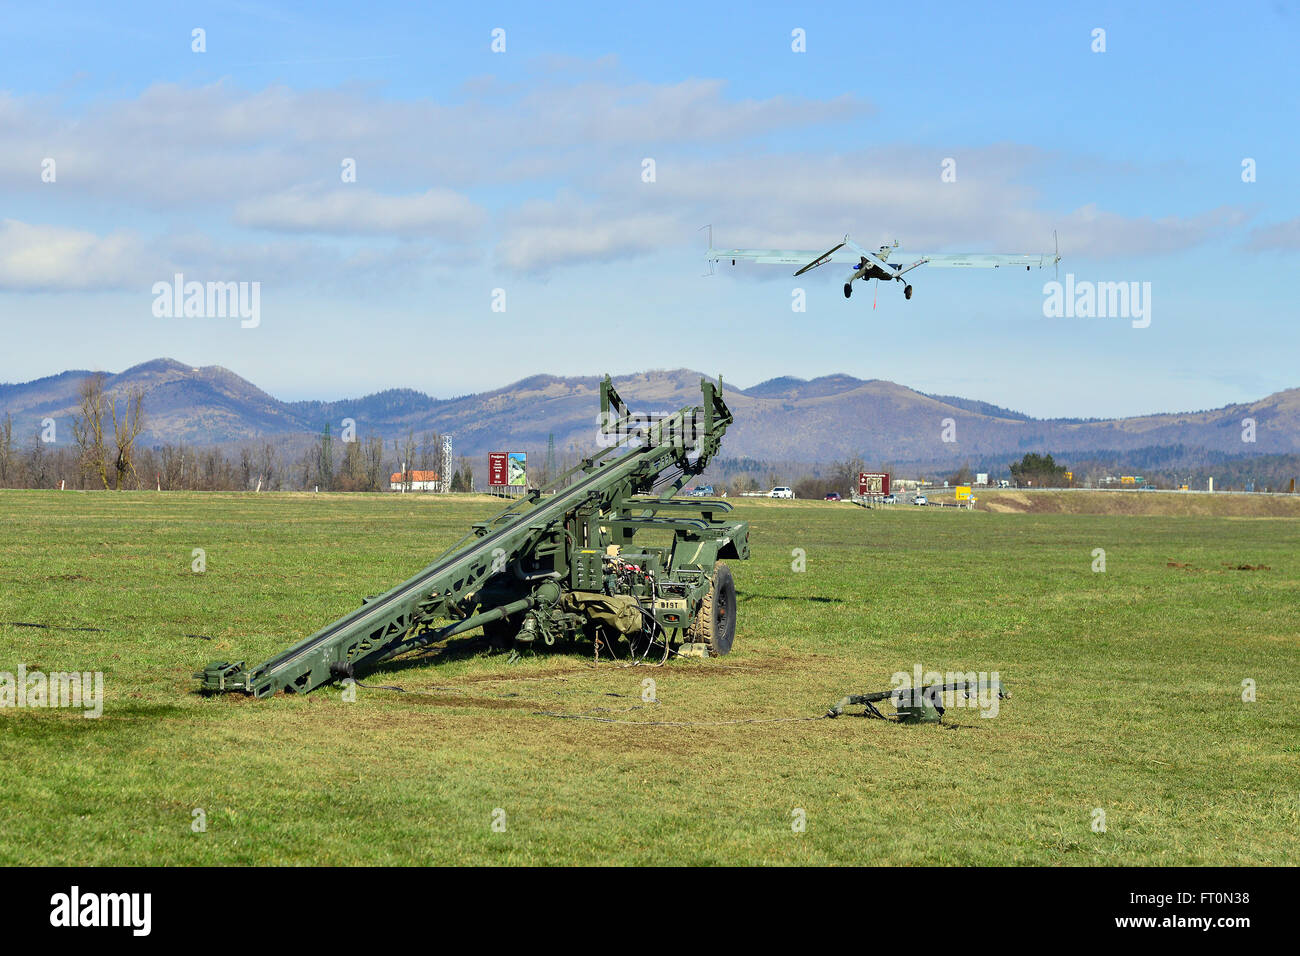 An RQ7B Shadow unmanned aircraft system assigned to 54th Brigade Engineer Battalion, 173rd Airborne Brigade, launches from a nitrogen launcher at Aeroclub Postonja in Slovenia, March 2, 2016, during the Exercise Rock Sokol. Exercise Rock Sokol is a bilateral training exercise between U.S. Soldiers assigned to 173rd Airborne Brigade and the Slovenian Armed Forces, focused on small-unit tactics and building on previous lessons learned, forging the bonds and enhancing readiness between allied forces. The 173rd Airborne Brigade is the U.S. Army's Contingency Response Force in Europe, providing rap Stock Photo